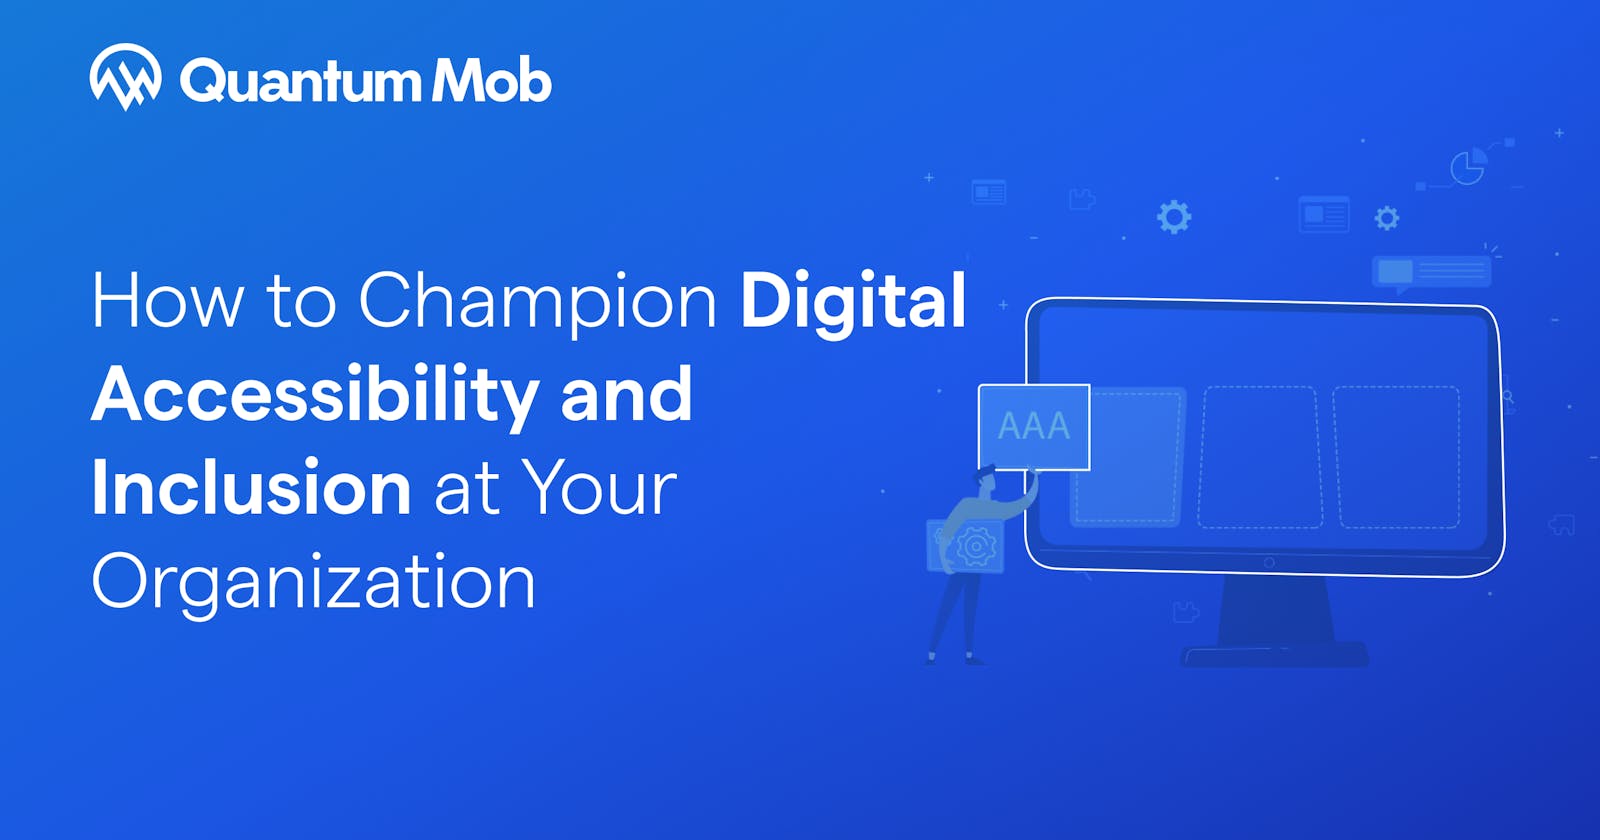 How to Champion Digital Accessibility and Inclusion at Your Organization